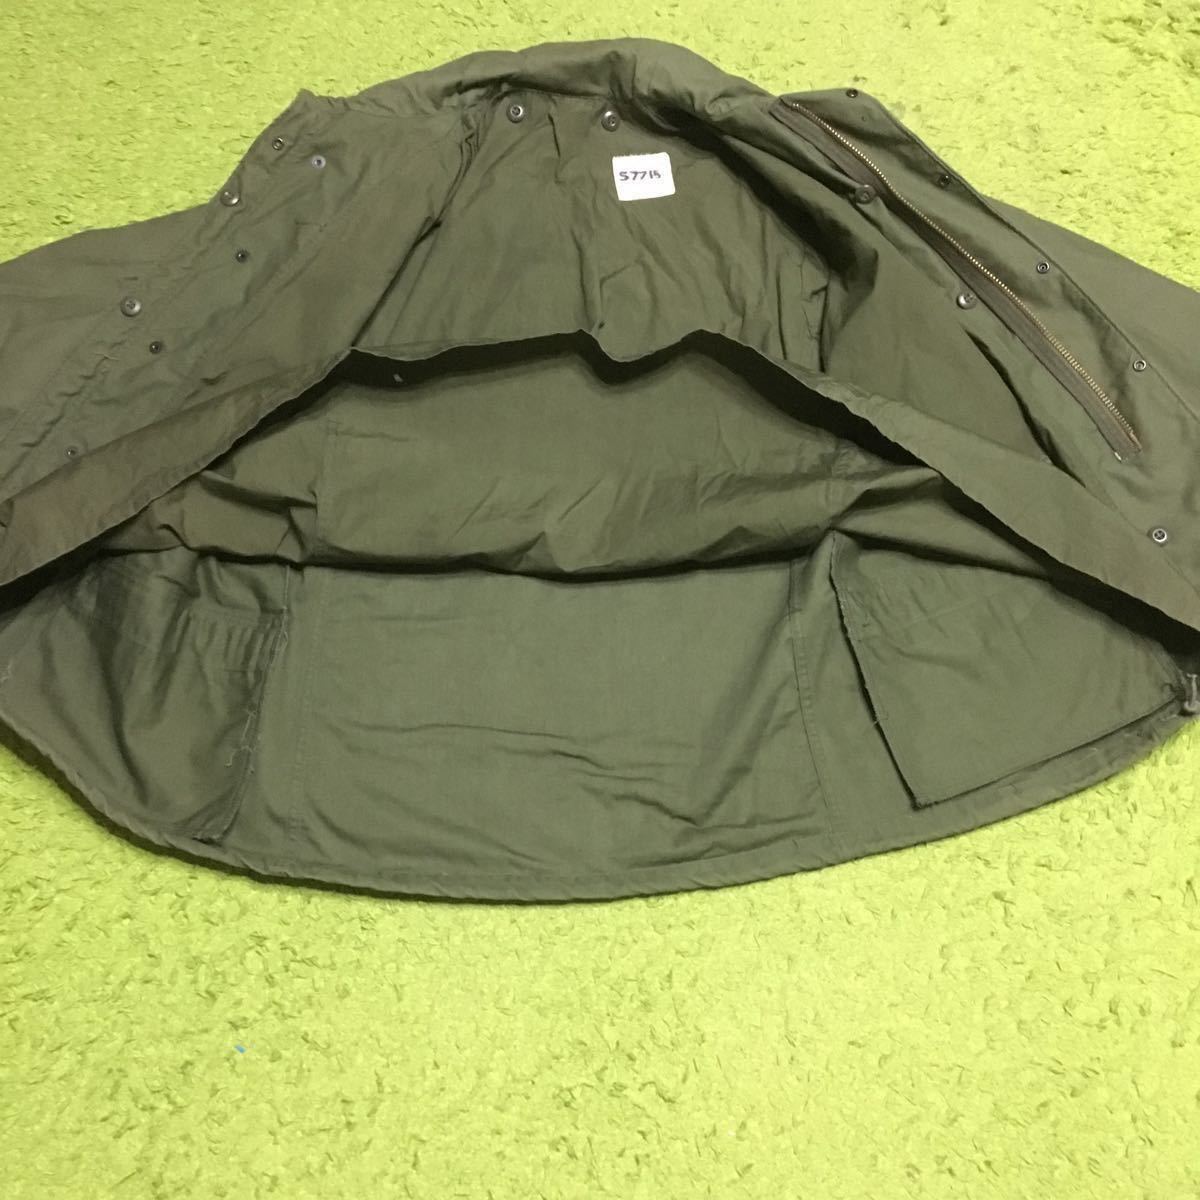 made in USA's military deadstock/COAT COLDWEATHER,FIELD/M